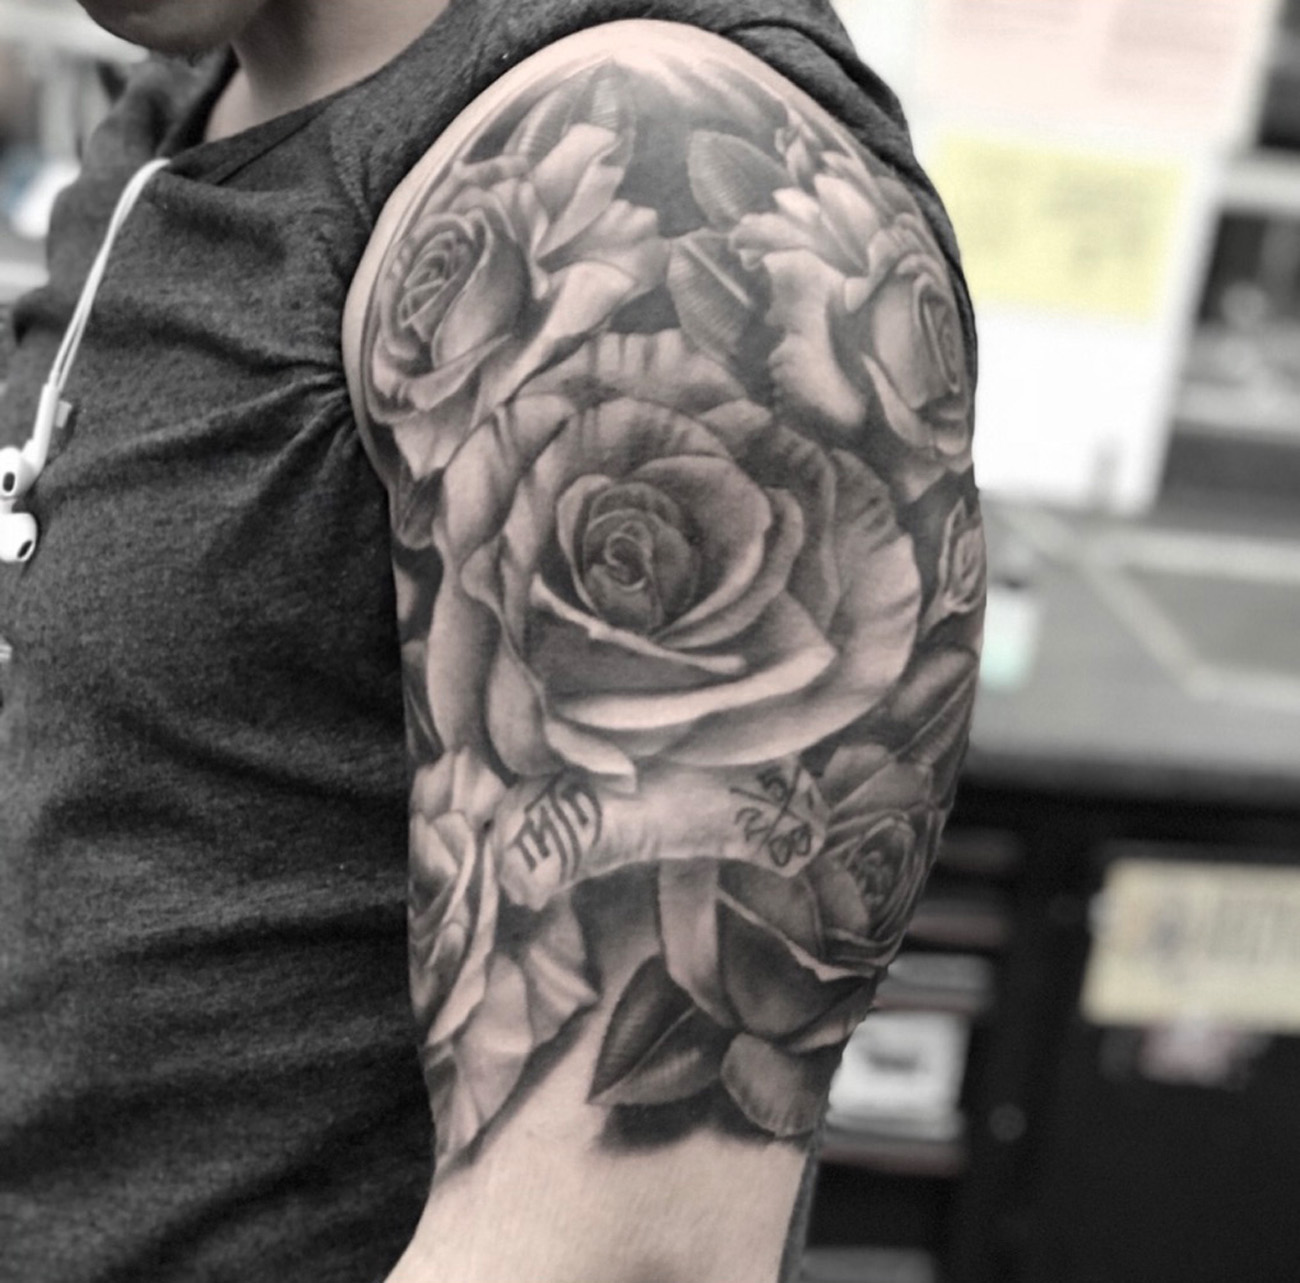 Black and grey rose tattoo on the left forearm